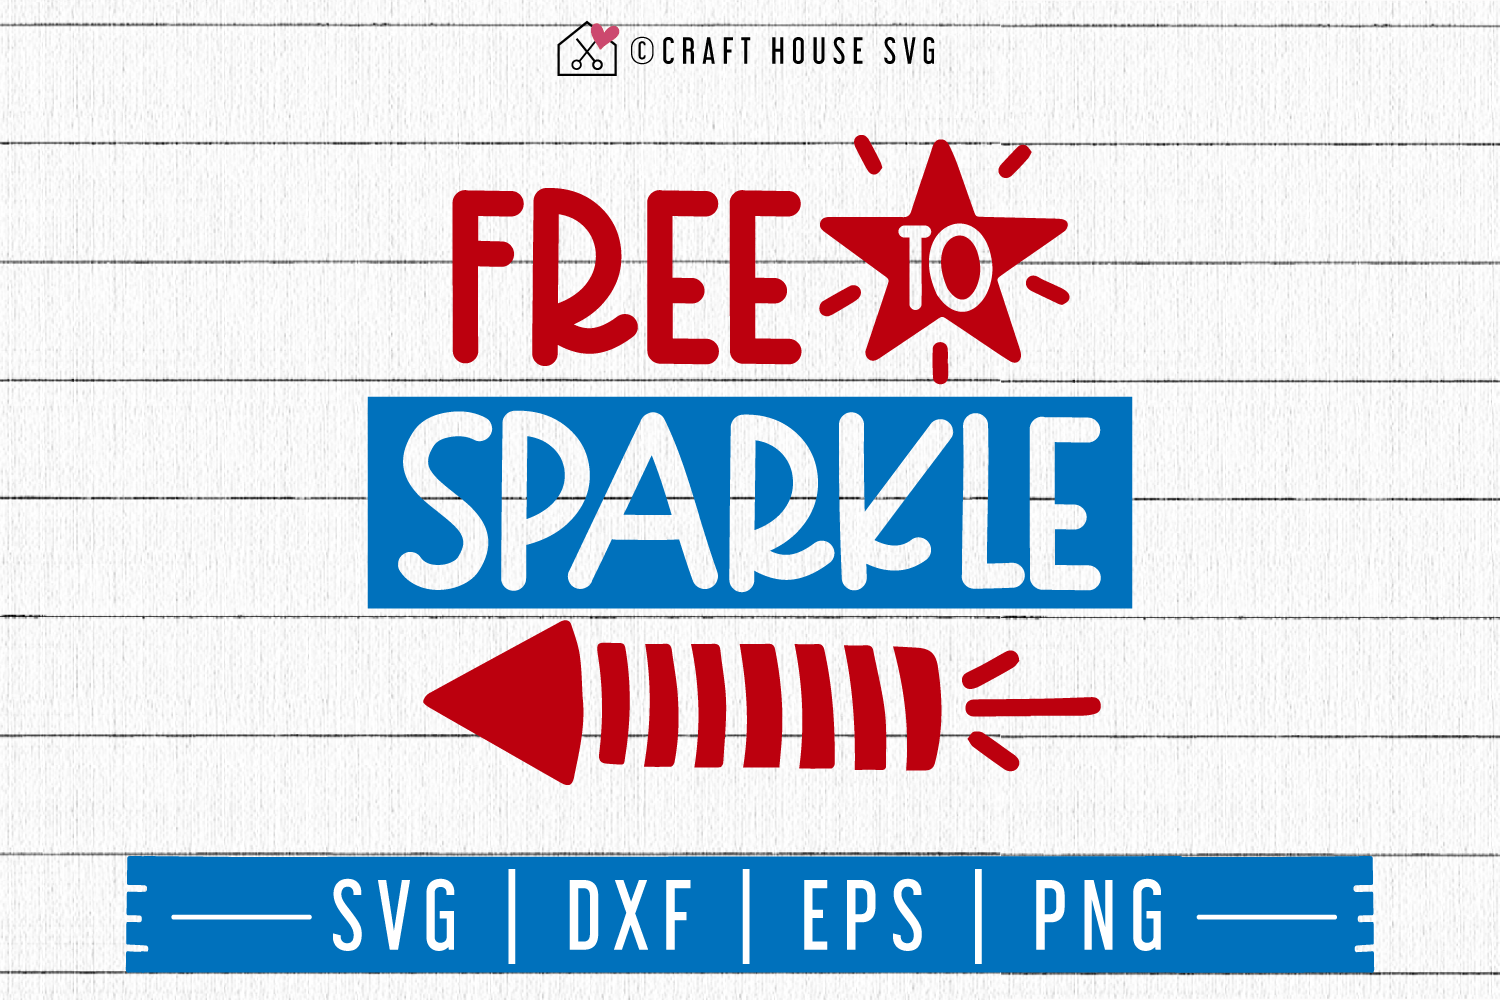 4th of July SVG file | Free to sparkle SVG Craft House SVG - SVG files for Cricut and Silhouette